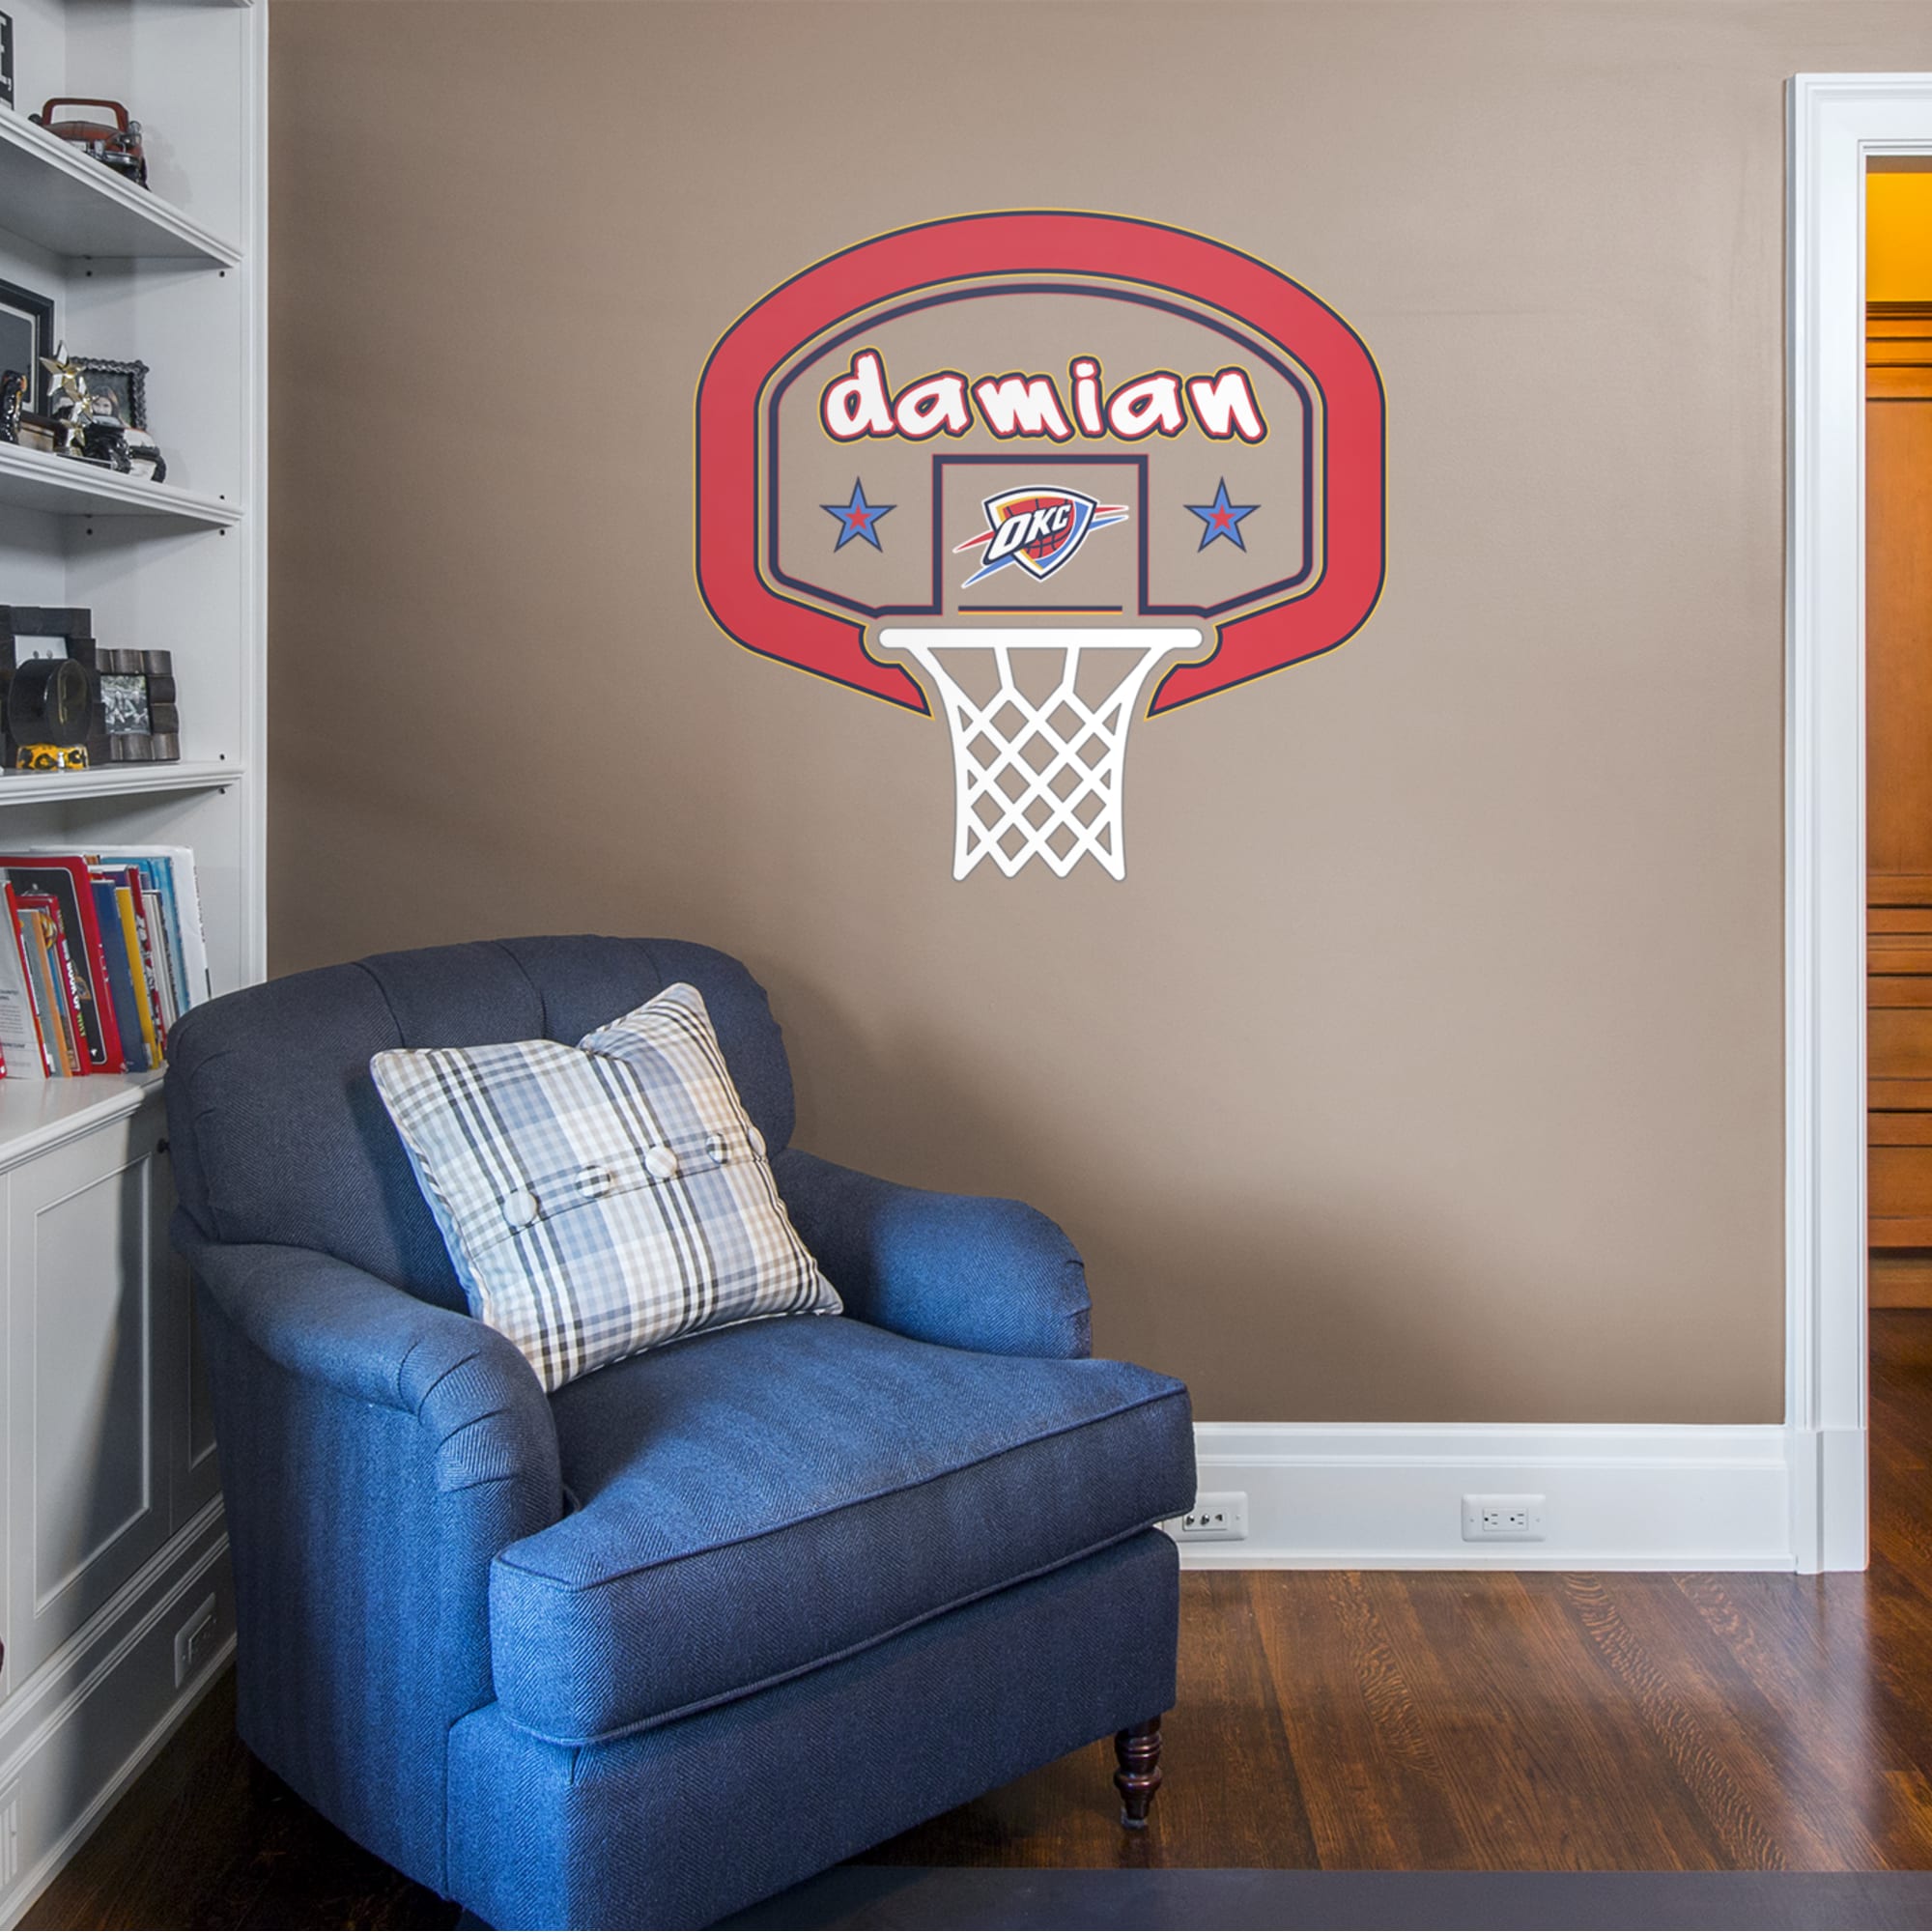 Oklahoma City Thunder: Personalized Name - Officially Licensed NBA Transfer Decal 52.0"W x 39.5"H by Fathead | Vinyl